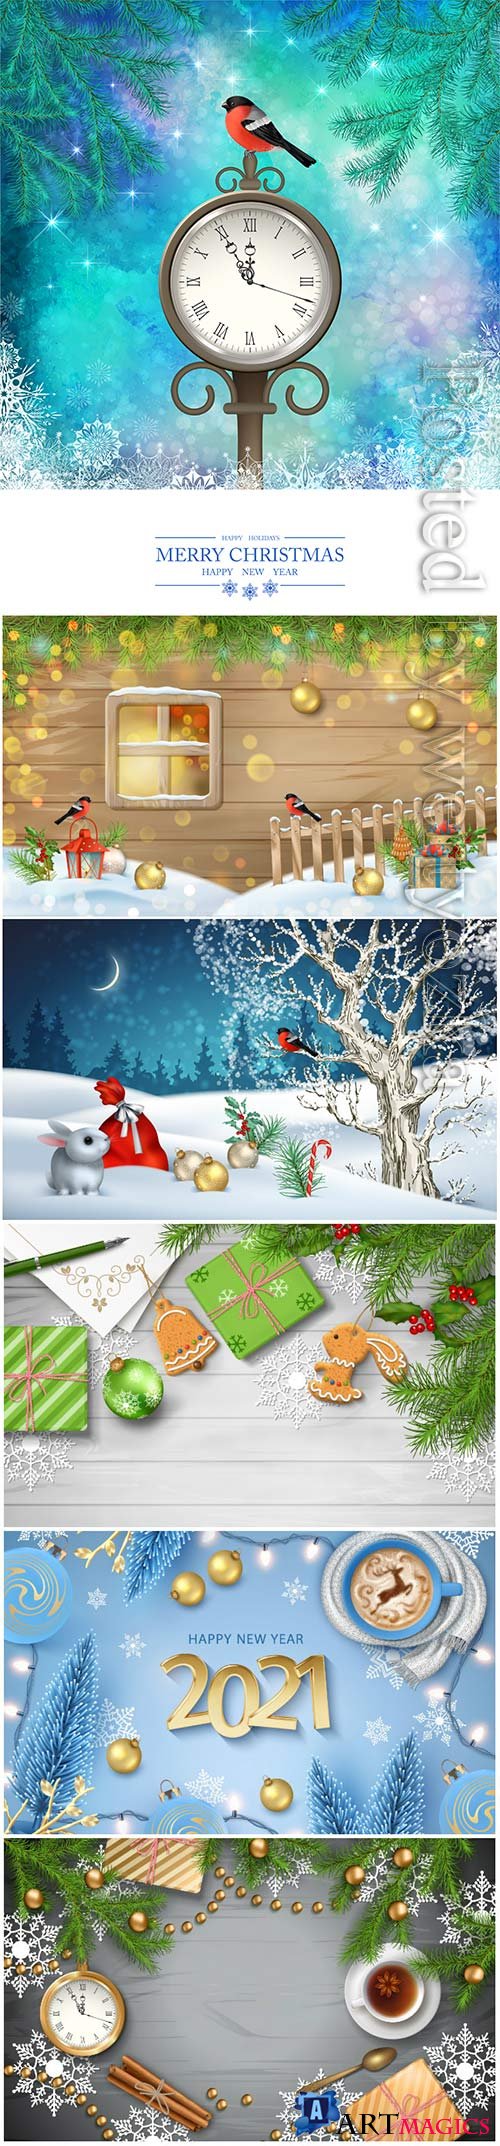 Christmas and new year vector party poster